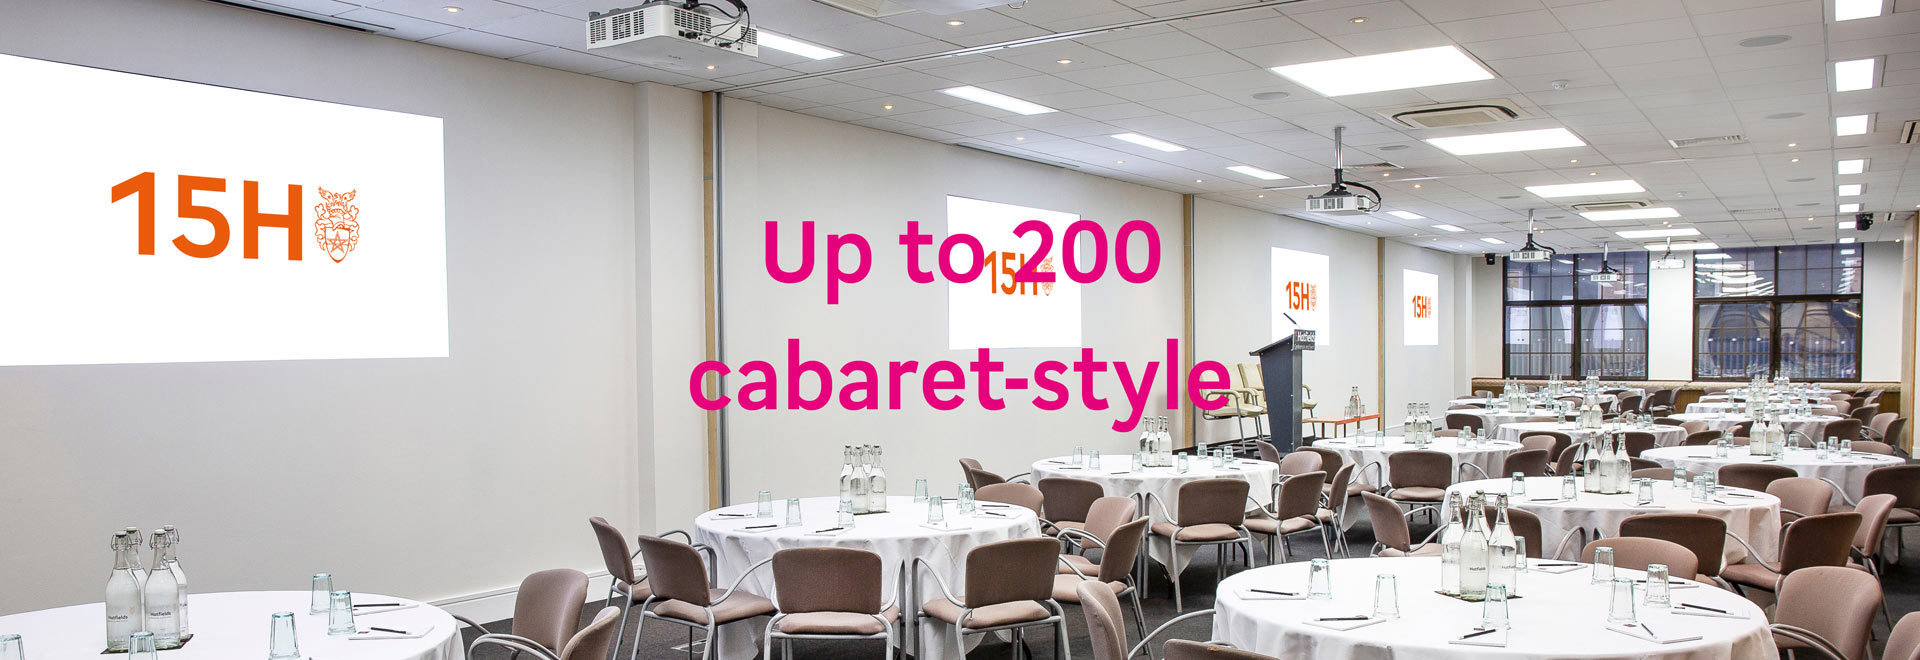 15Hatfields conference room with the words 'Up to 200 cabaret-style'